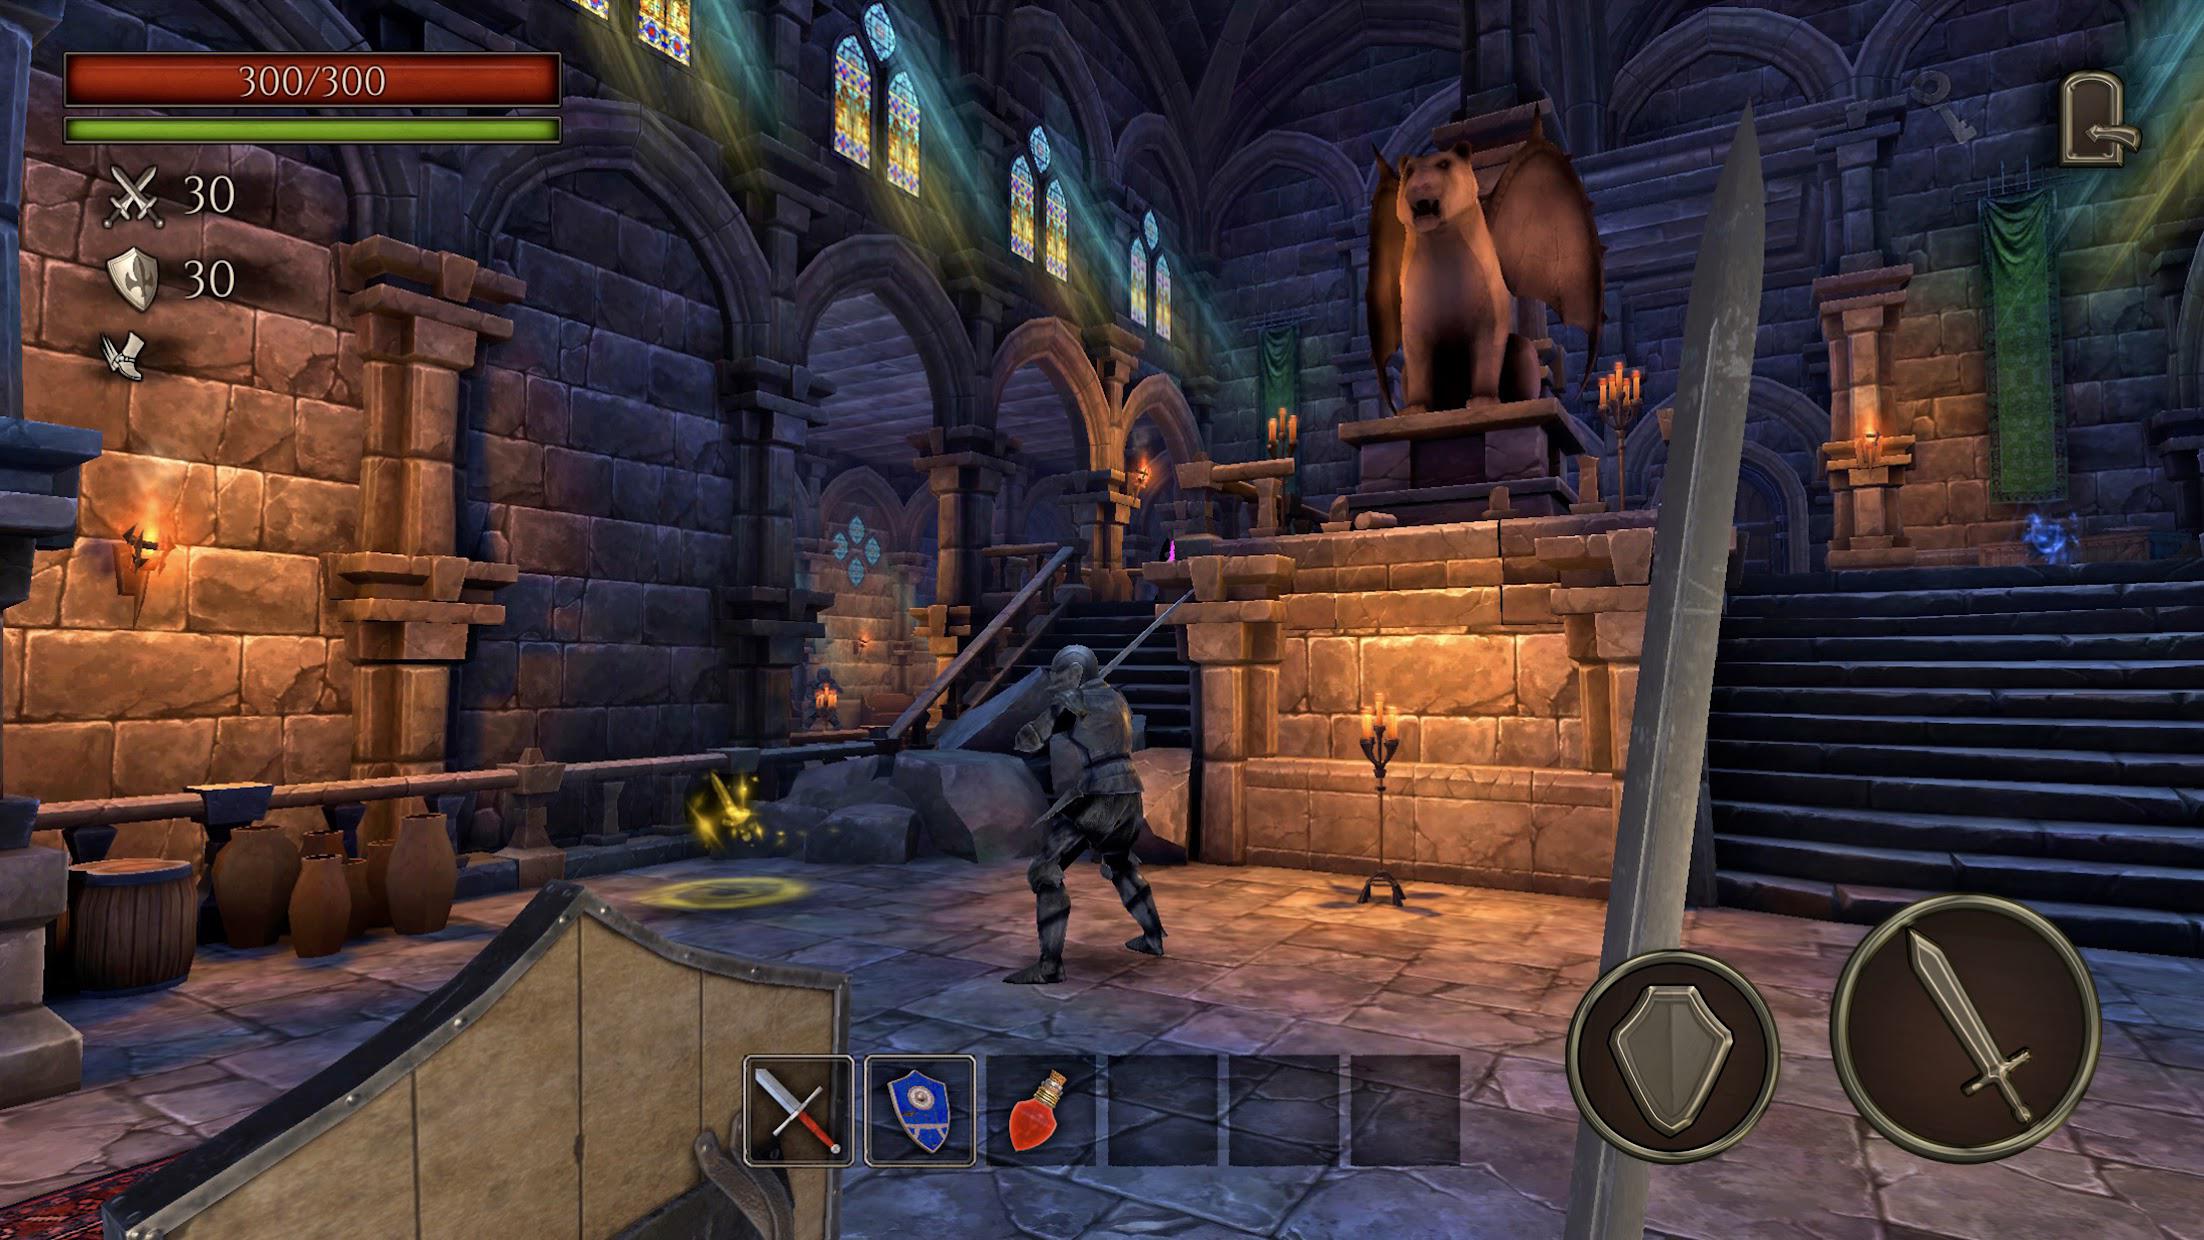 Ghoul Castle 3D - Action RPG Dungeon Crawler_游戏简介_图2